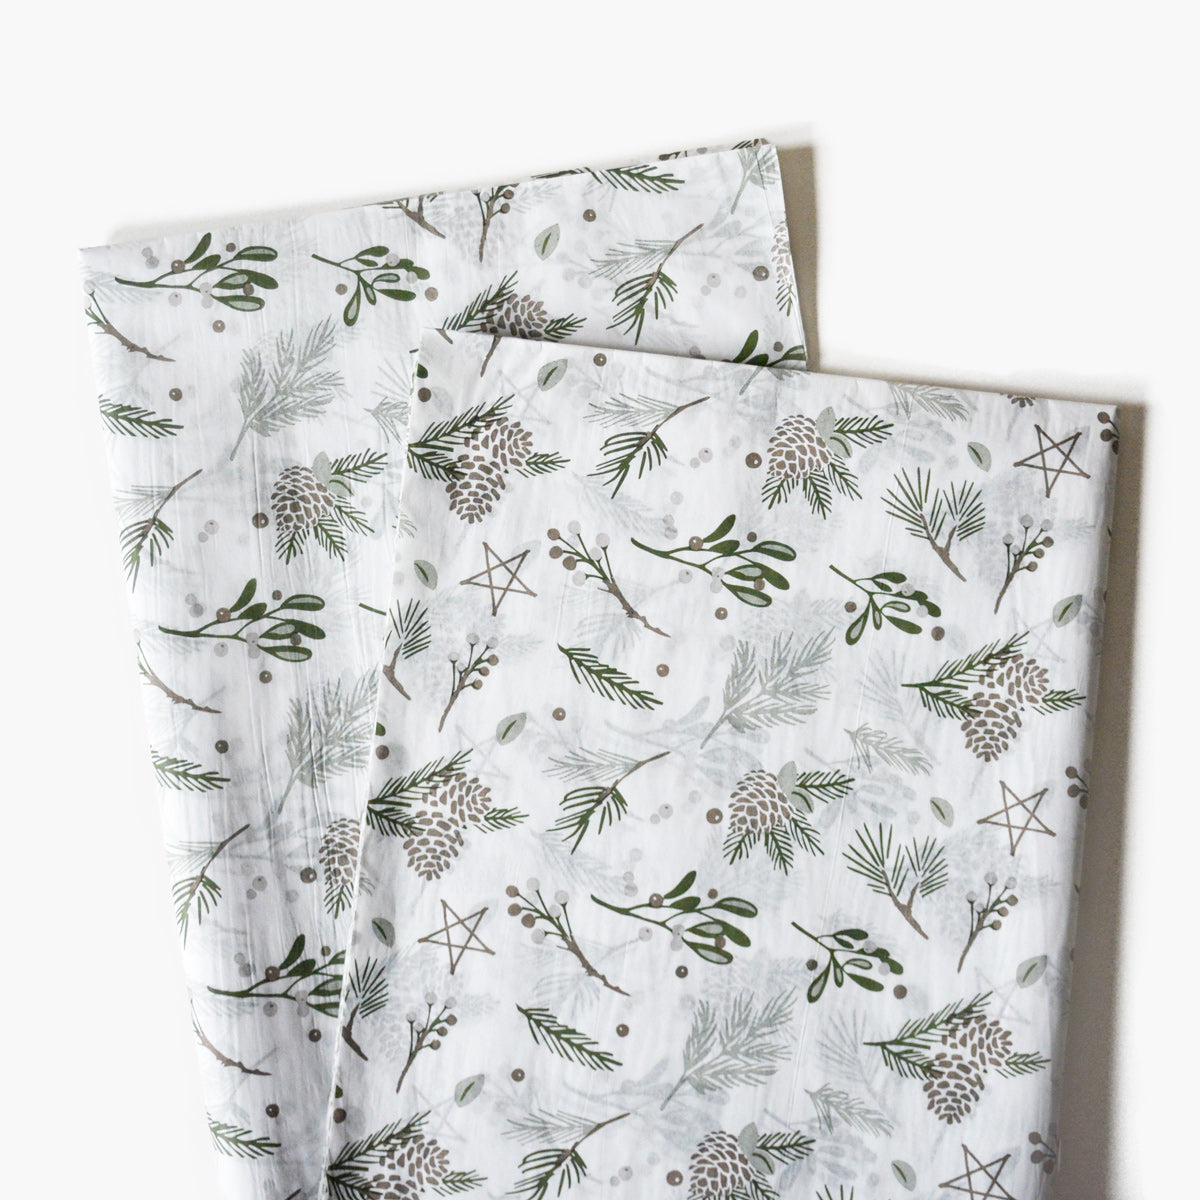 Pinecones and Winter Greeneries Patterned Tissue Paper - Winter Holiday  Gift Wrapping & DIY Projects Supplies - GenWooShop